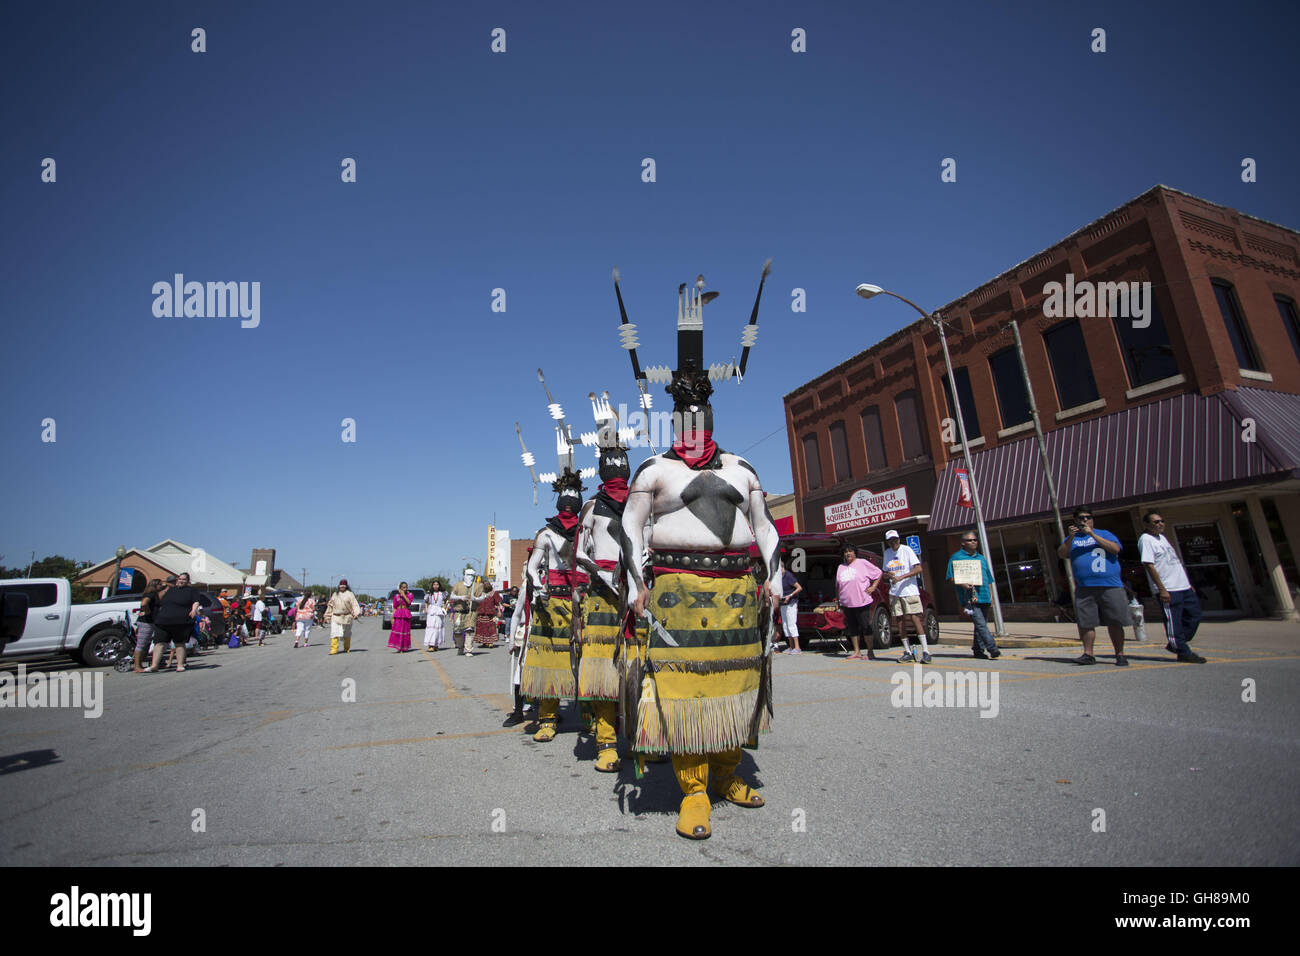 Anadarko, Oklahoma, USA. 8th Nov, 2016. The Fort Sill Apache fire dancers march during the annual American Indian Expo parade in Anadarko, Oklahoma.The annual American Indian Expo showcases the arts, crafts and traditions of 13 plains Indian tribes. The expo features The Chiricahua Apaches, commonly known as the Fort Sill Apache Fire Dancers. They perform the ''Dance of the Mountain Spirit'', which has been passed down to the Gooday family from generations of ancestors. The dance is said to drive away sickness and evil and bring good health and fortune. (Credit Image: © J Pat Carter via Stock Photo